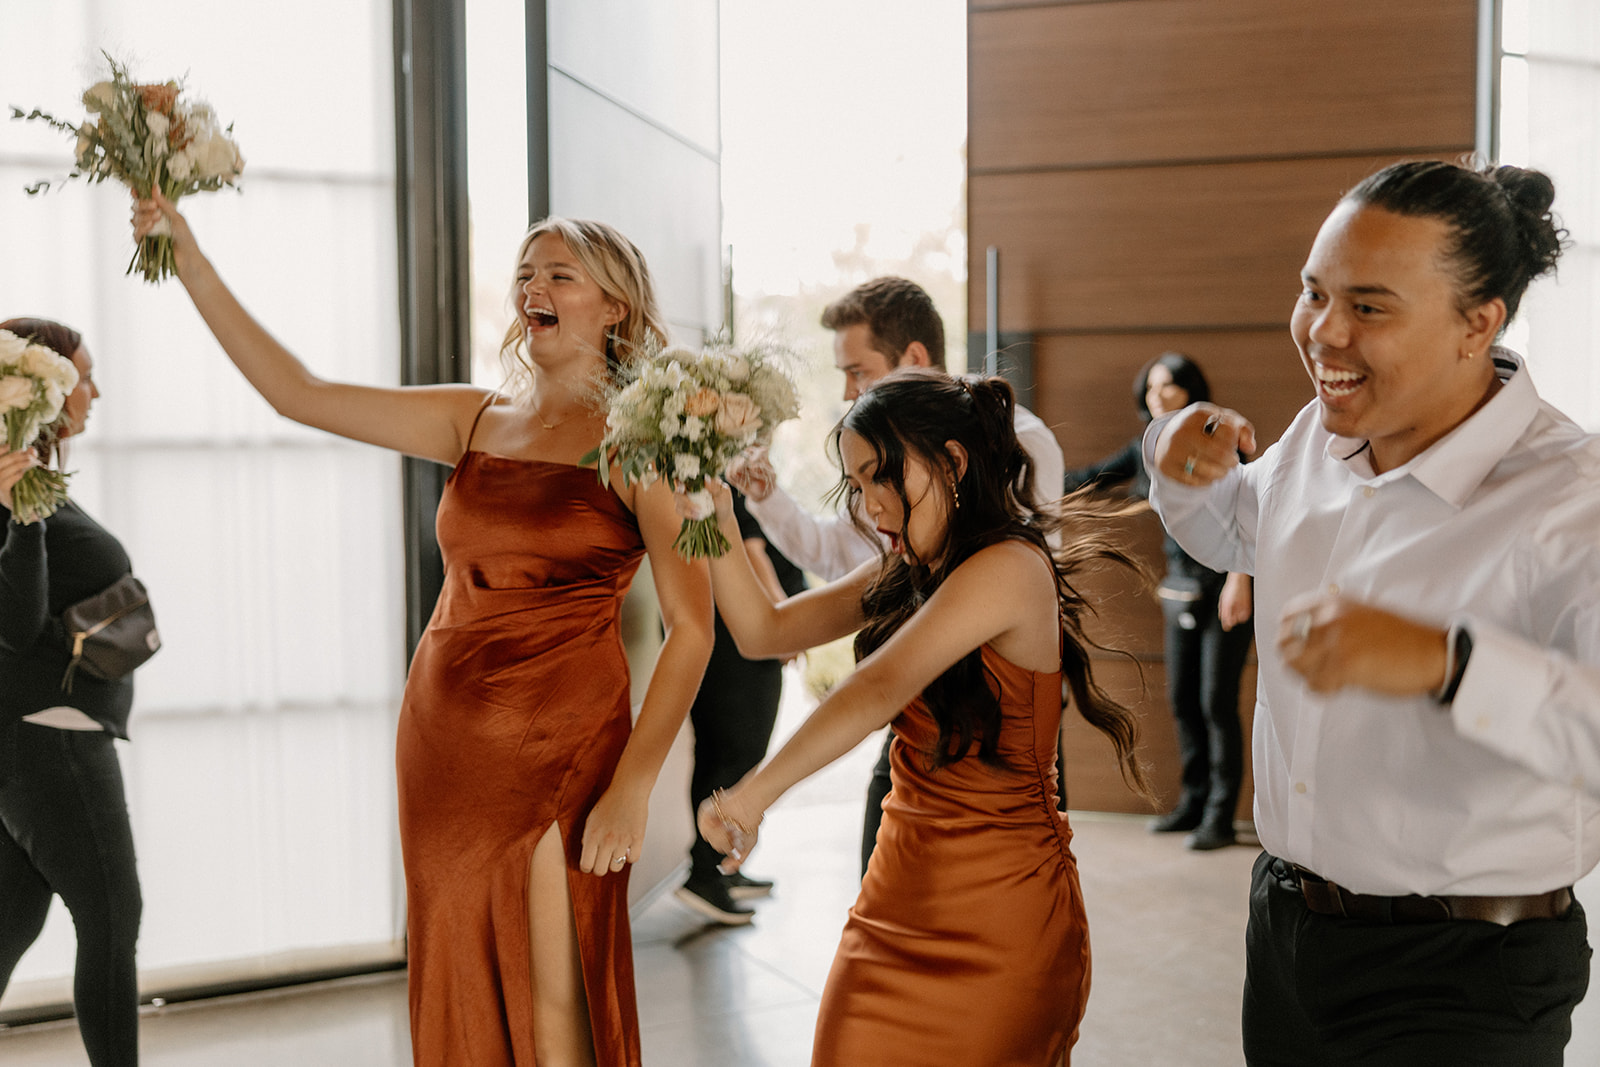 guests dance together during the stunning desert wedding reception